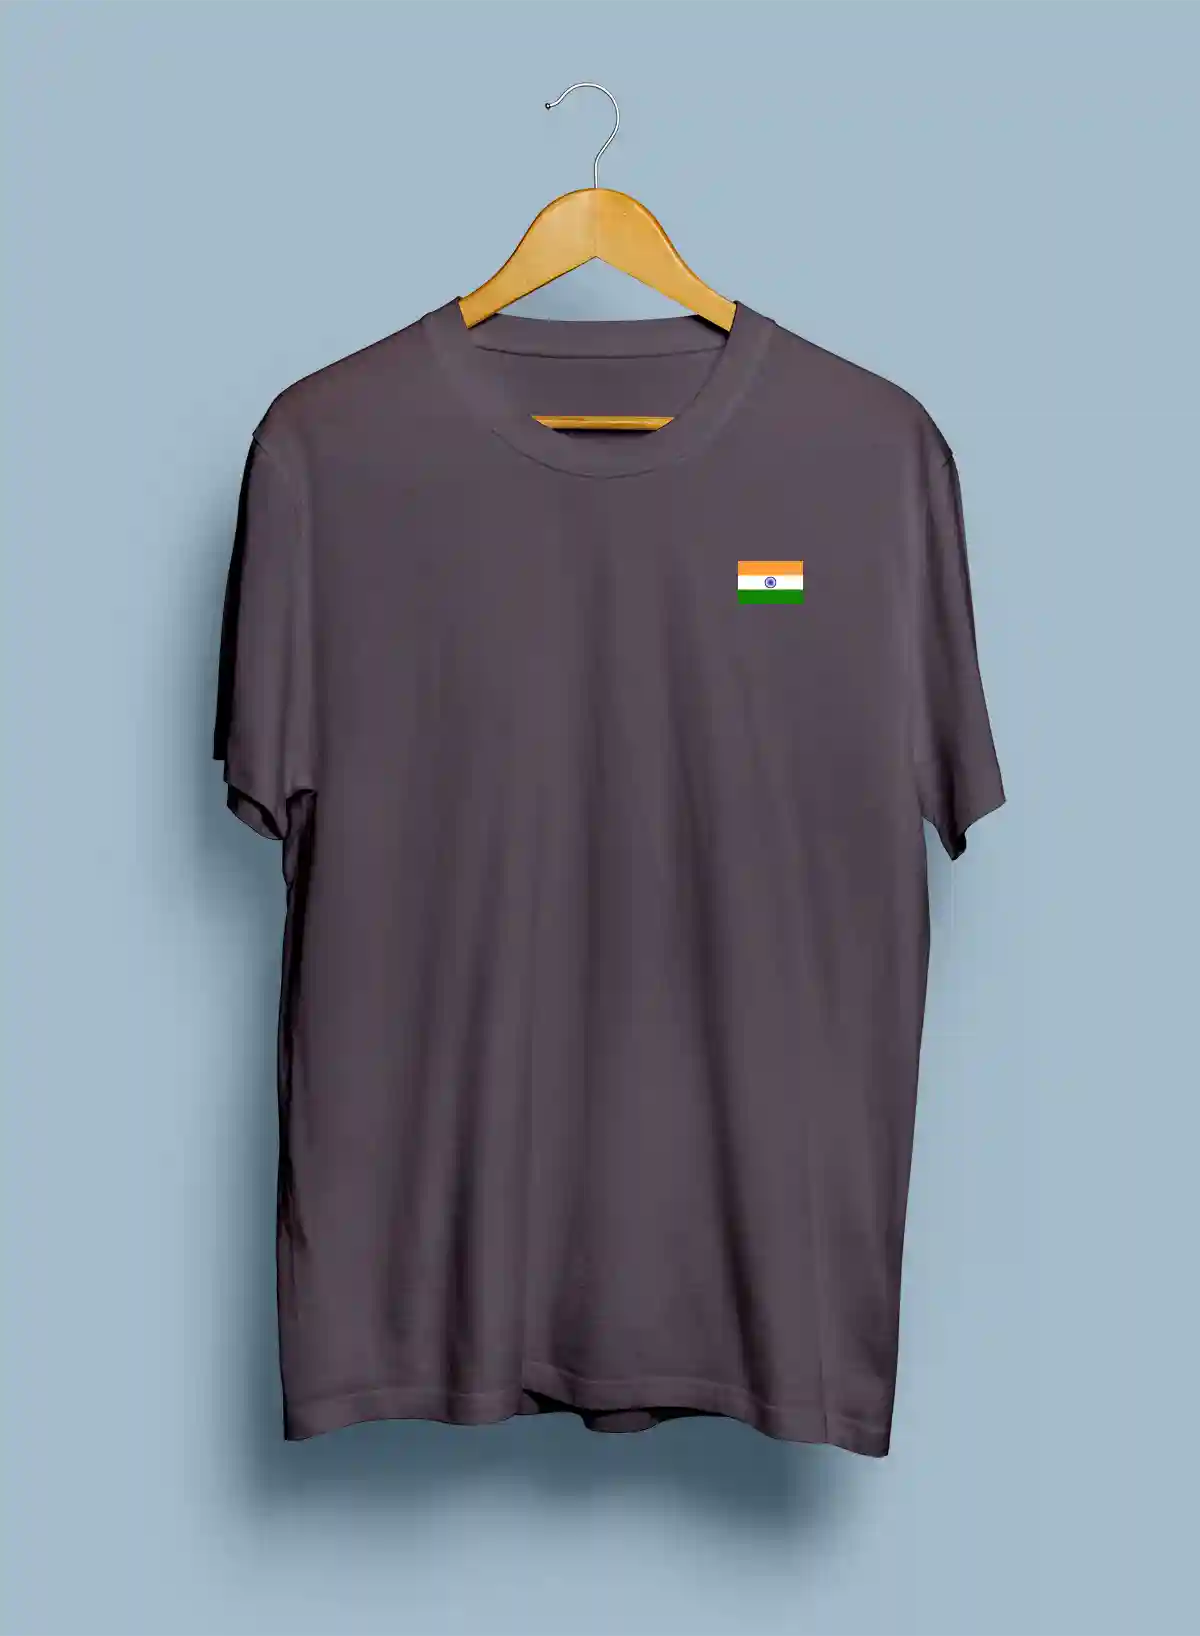 Indian Flag - Small